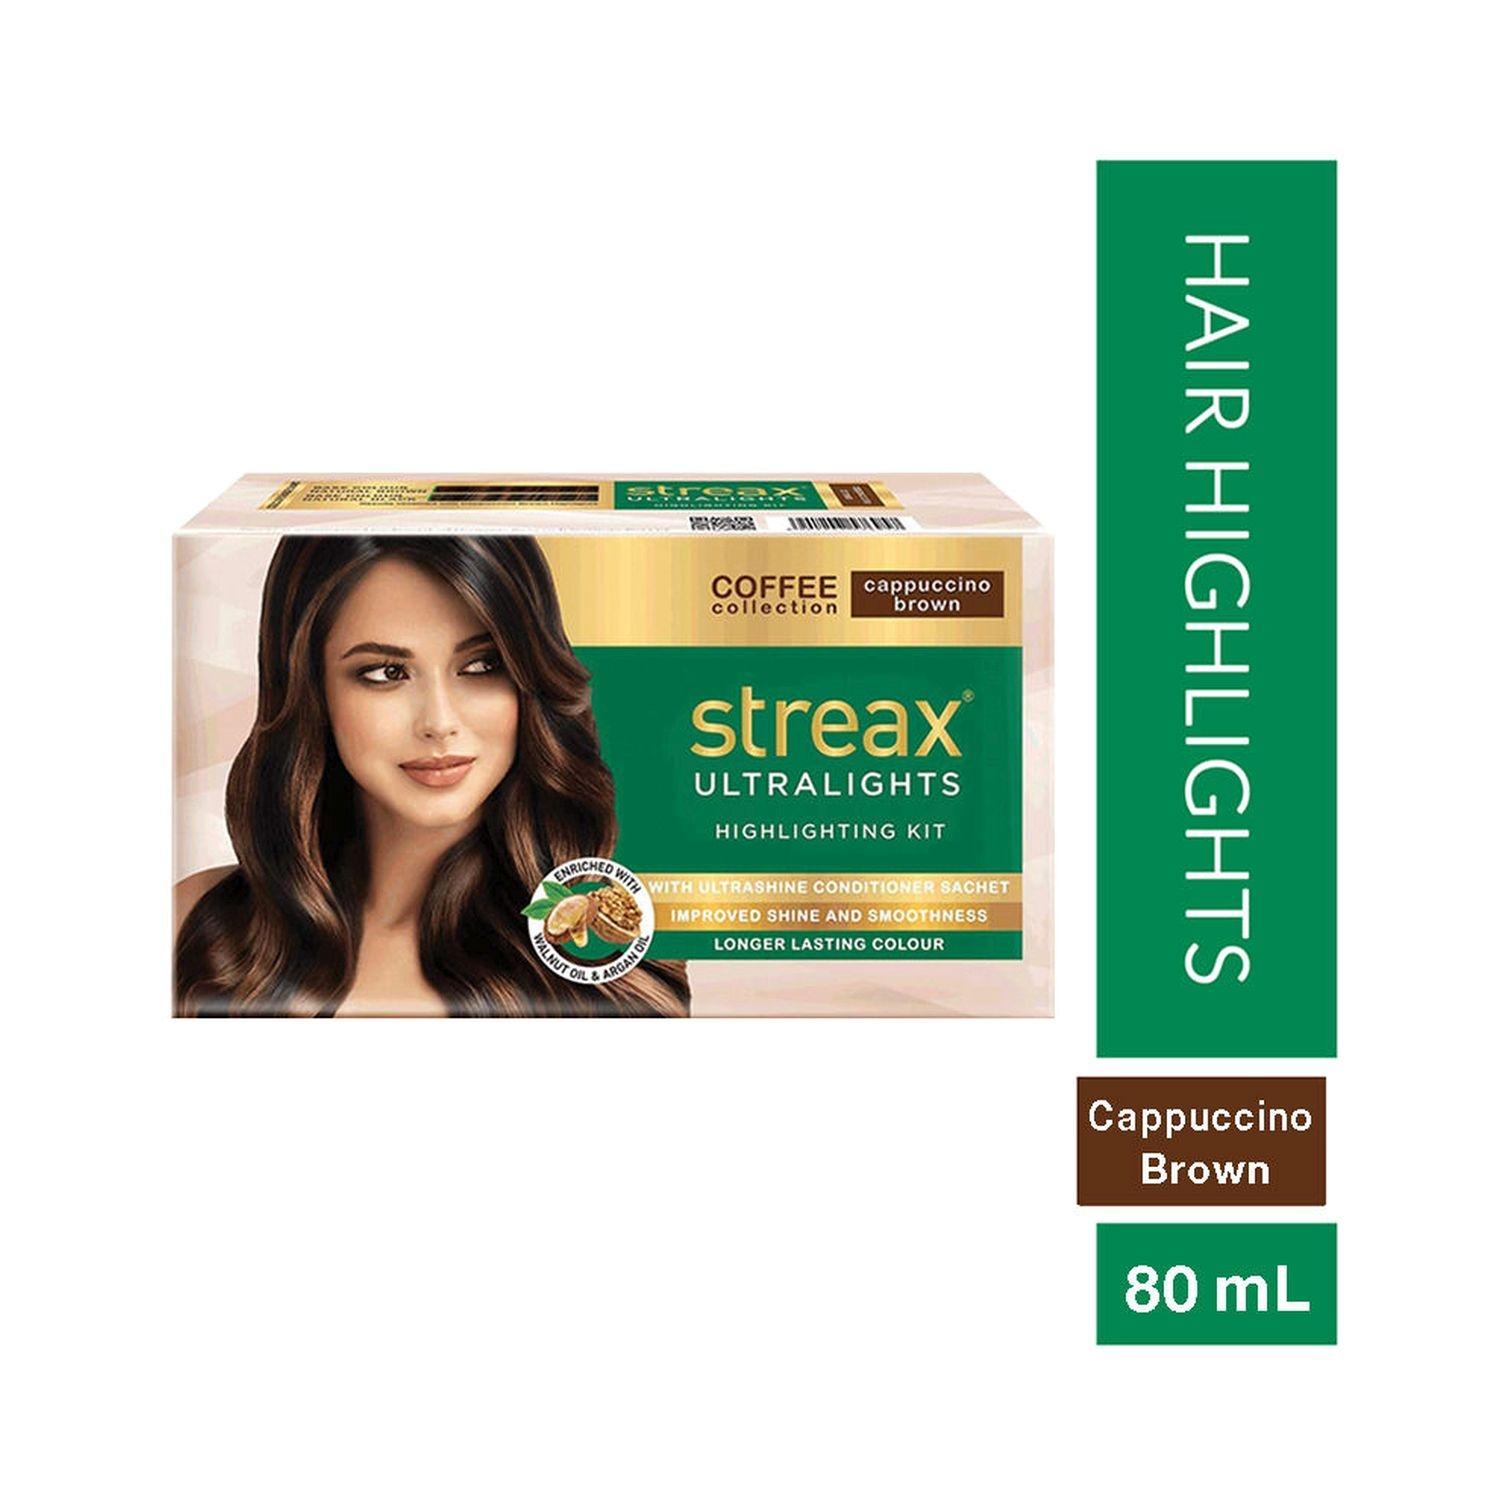 streax coffee collection ultralights highlighting kit - cappuccino brown (40gm+40ml)